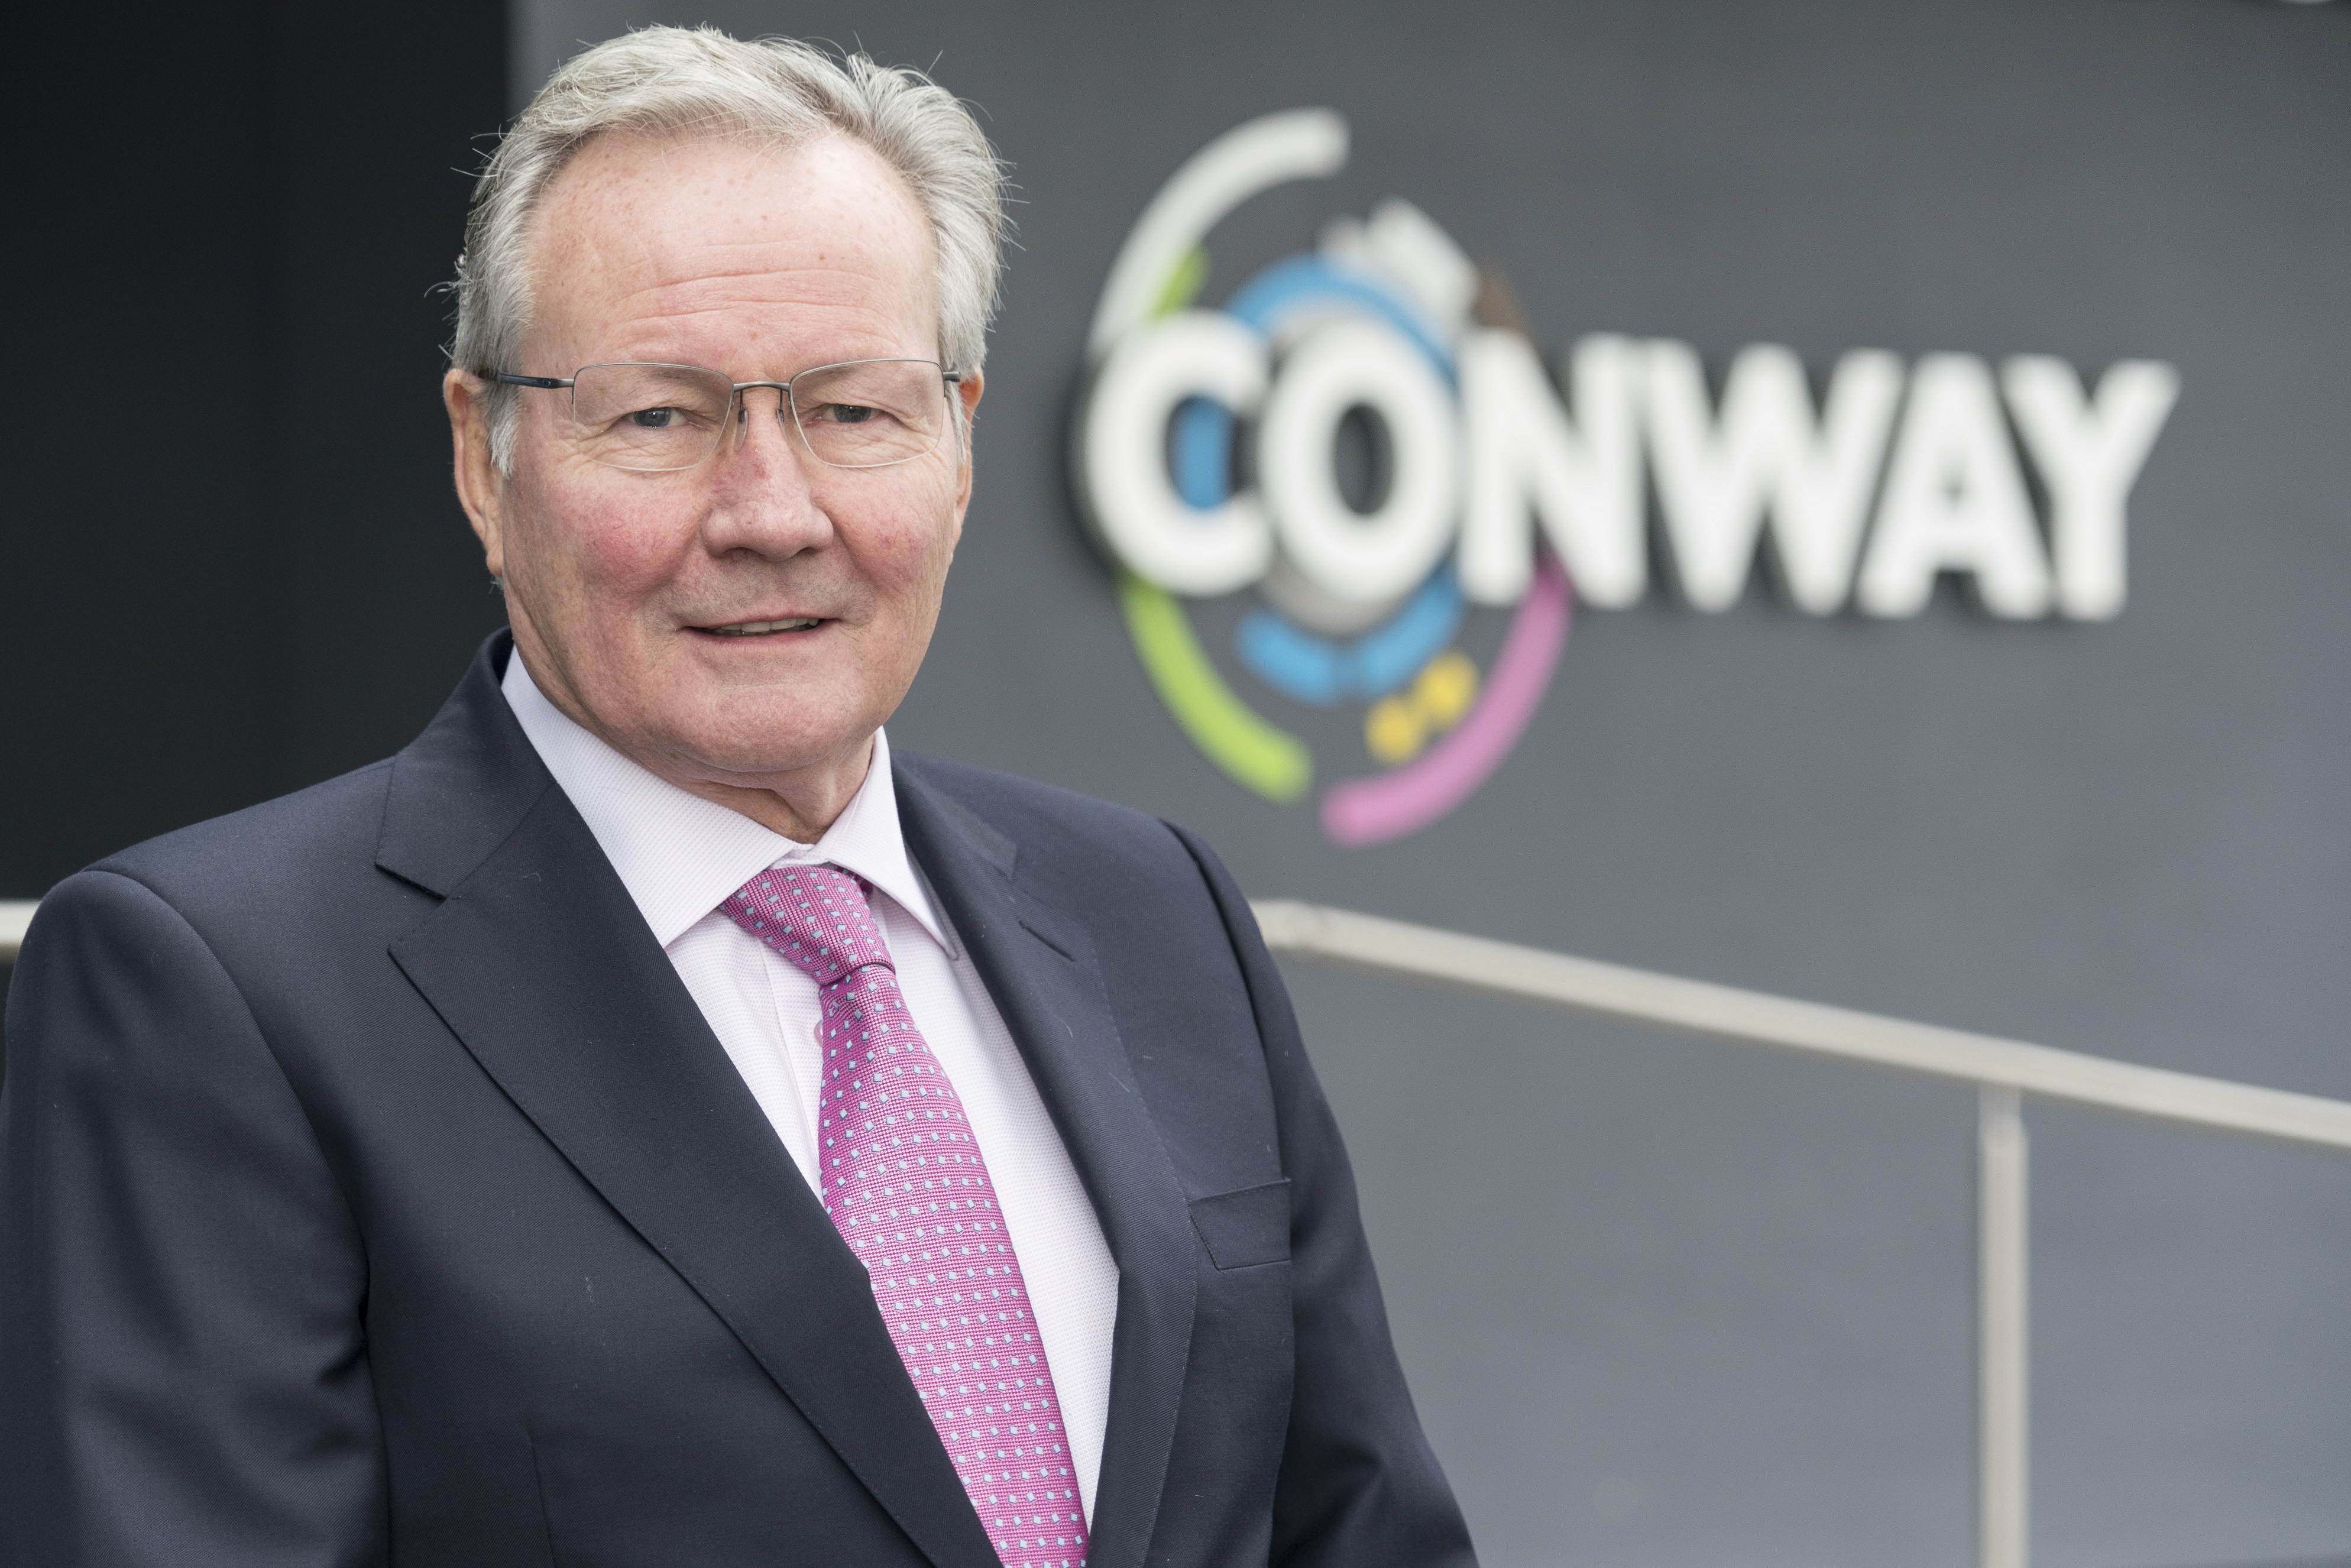 FM Conway unveils new CEO as Michael Conway takes step back